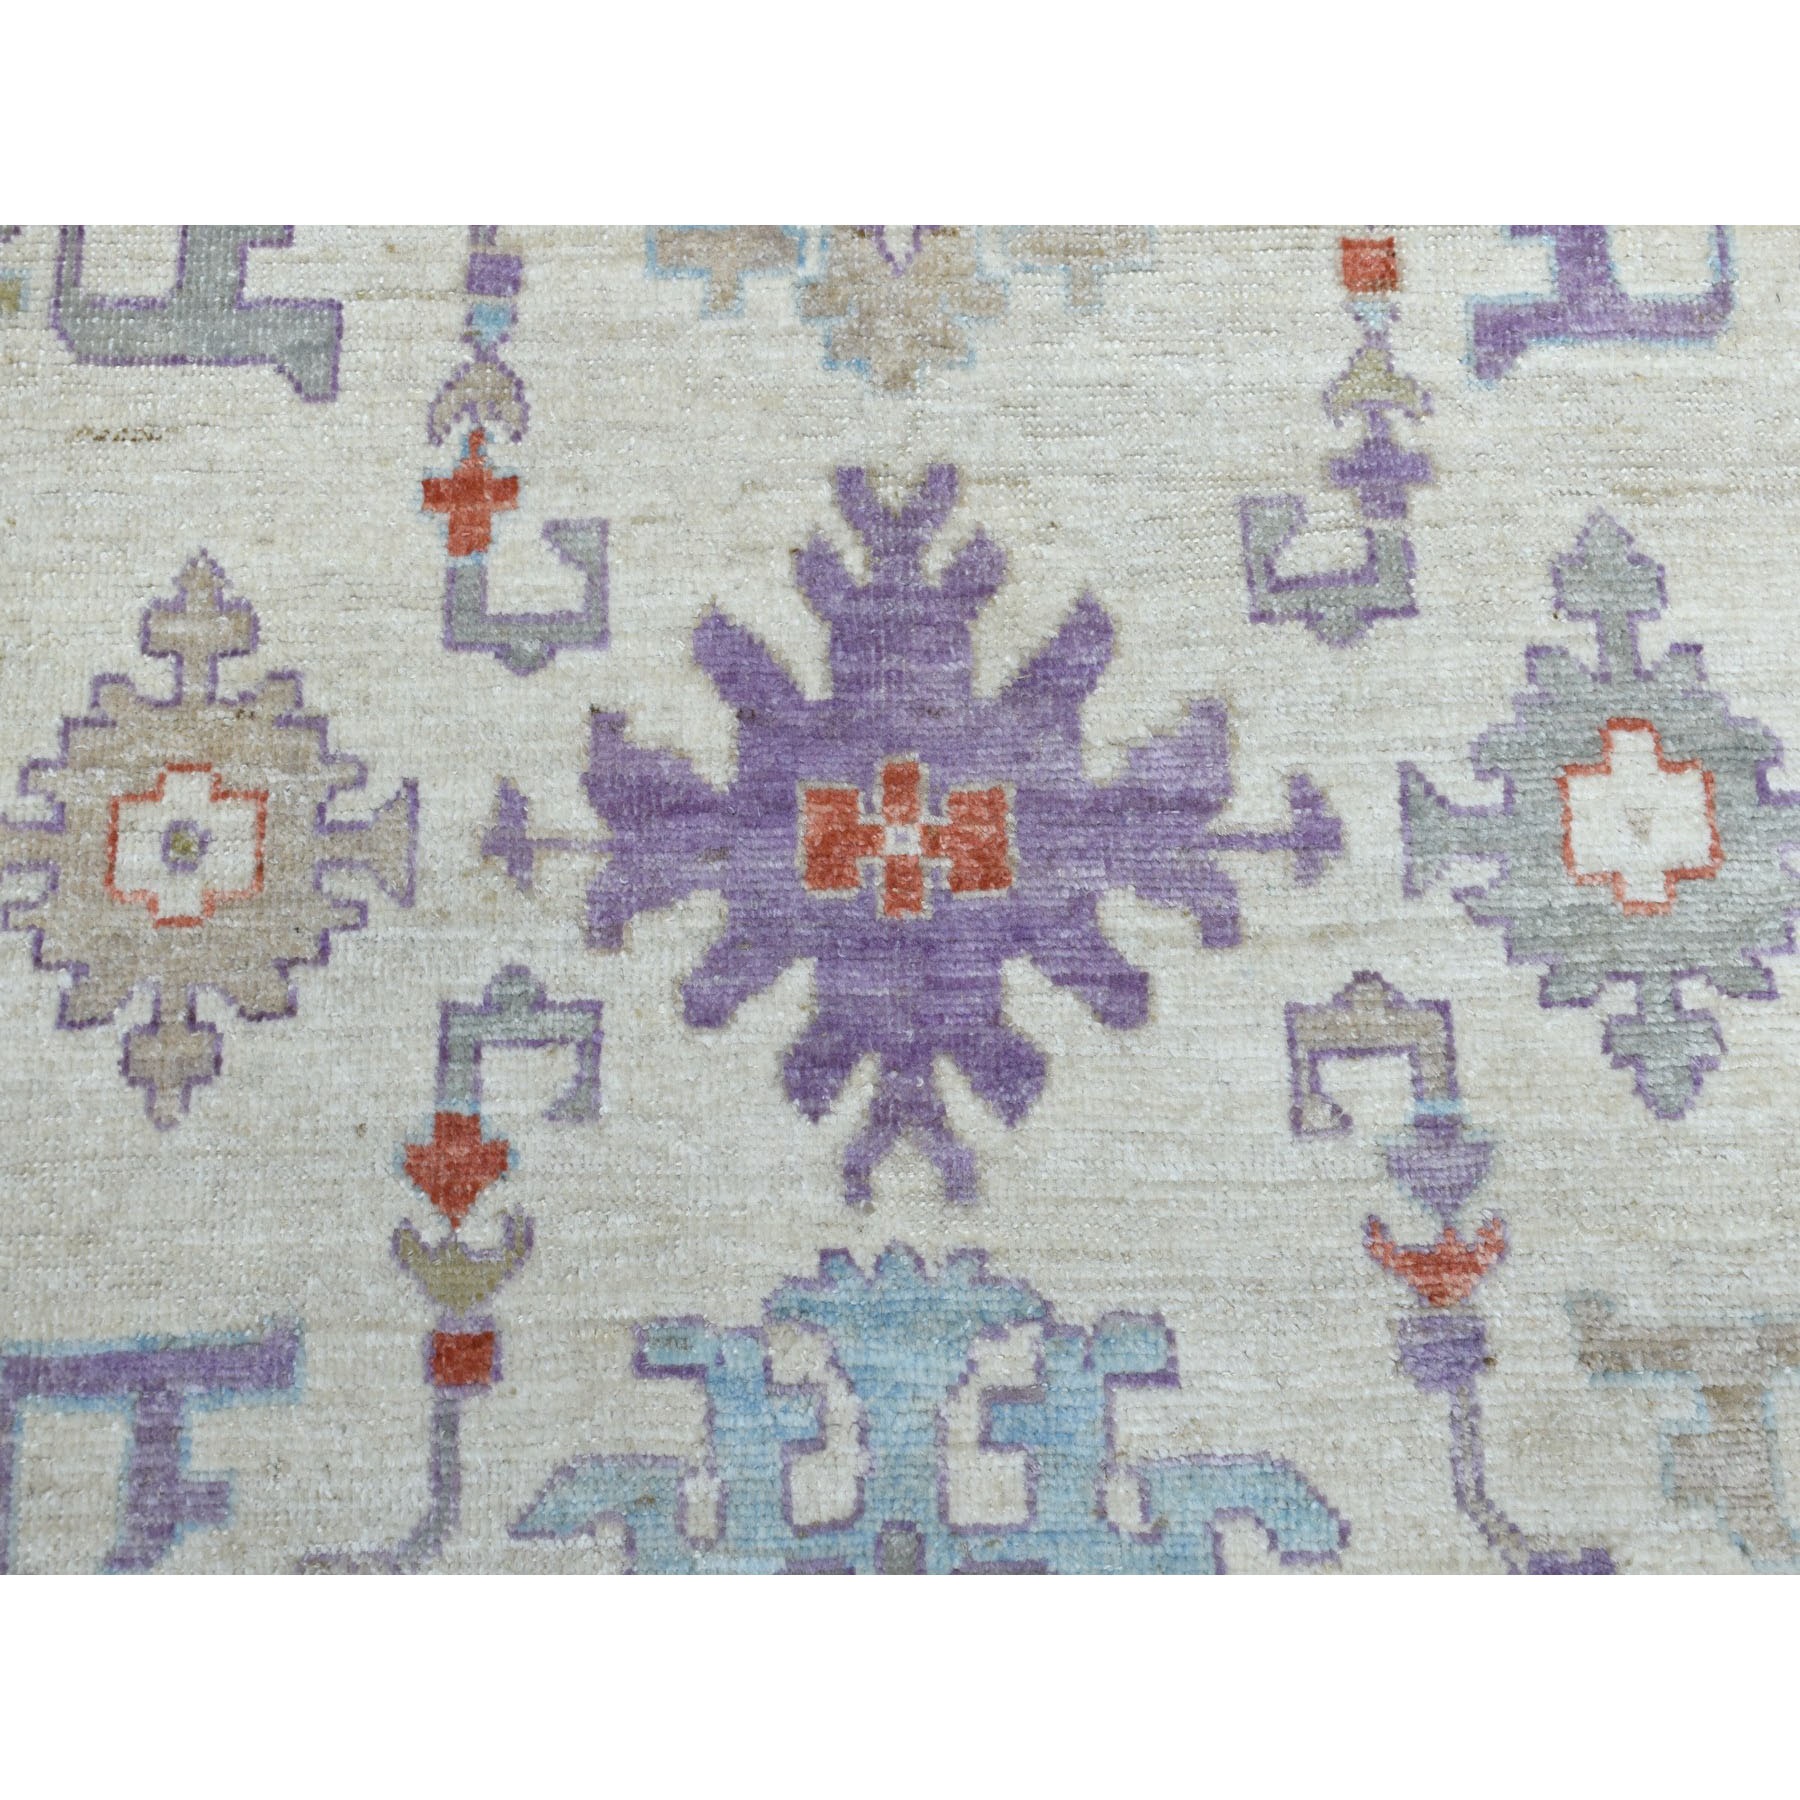 9-6 x13- Ivory Angora Oushak Pure Wool Hand Knotted Oriental Rug 